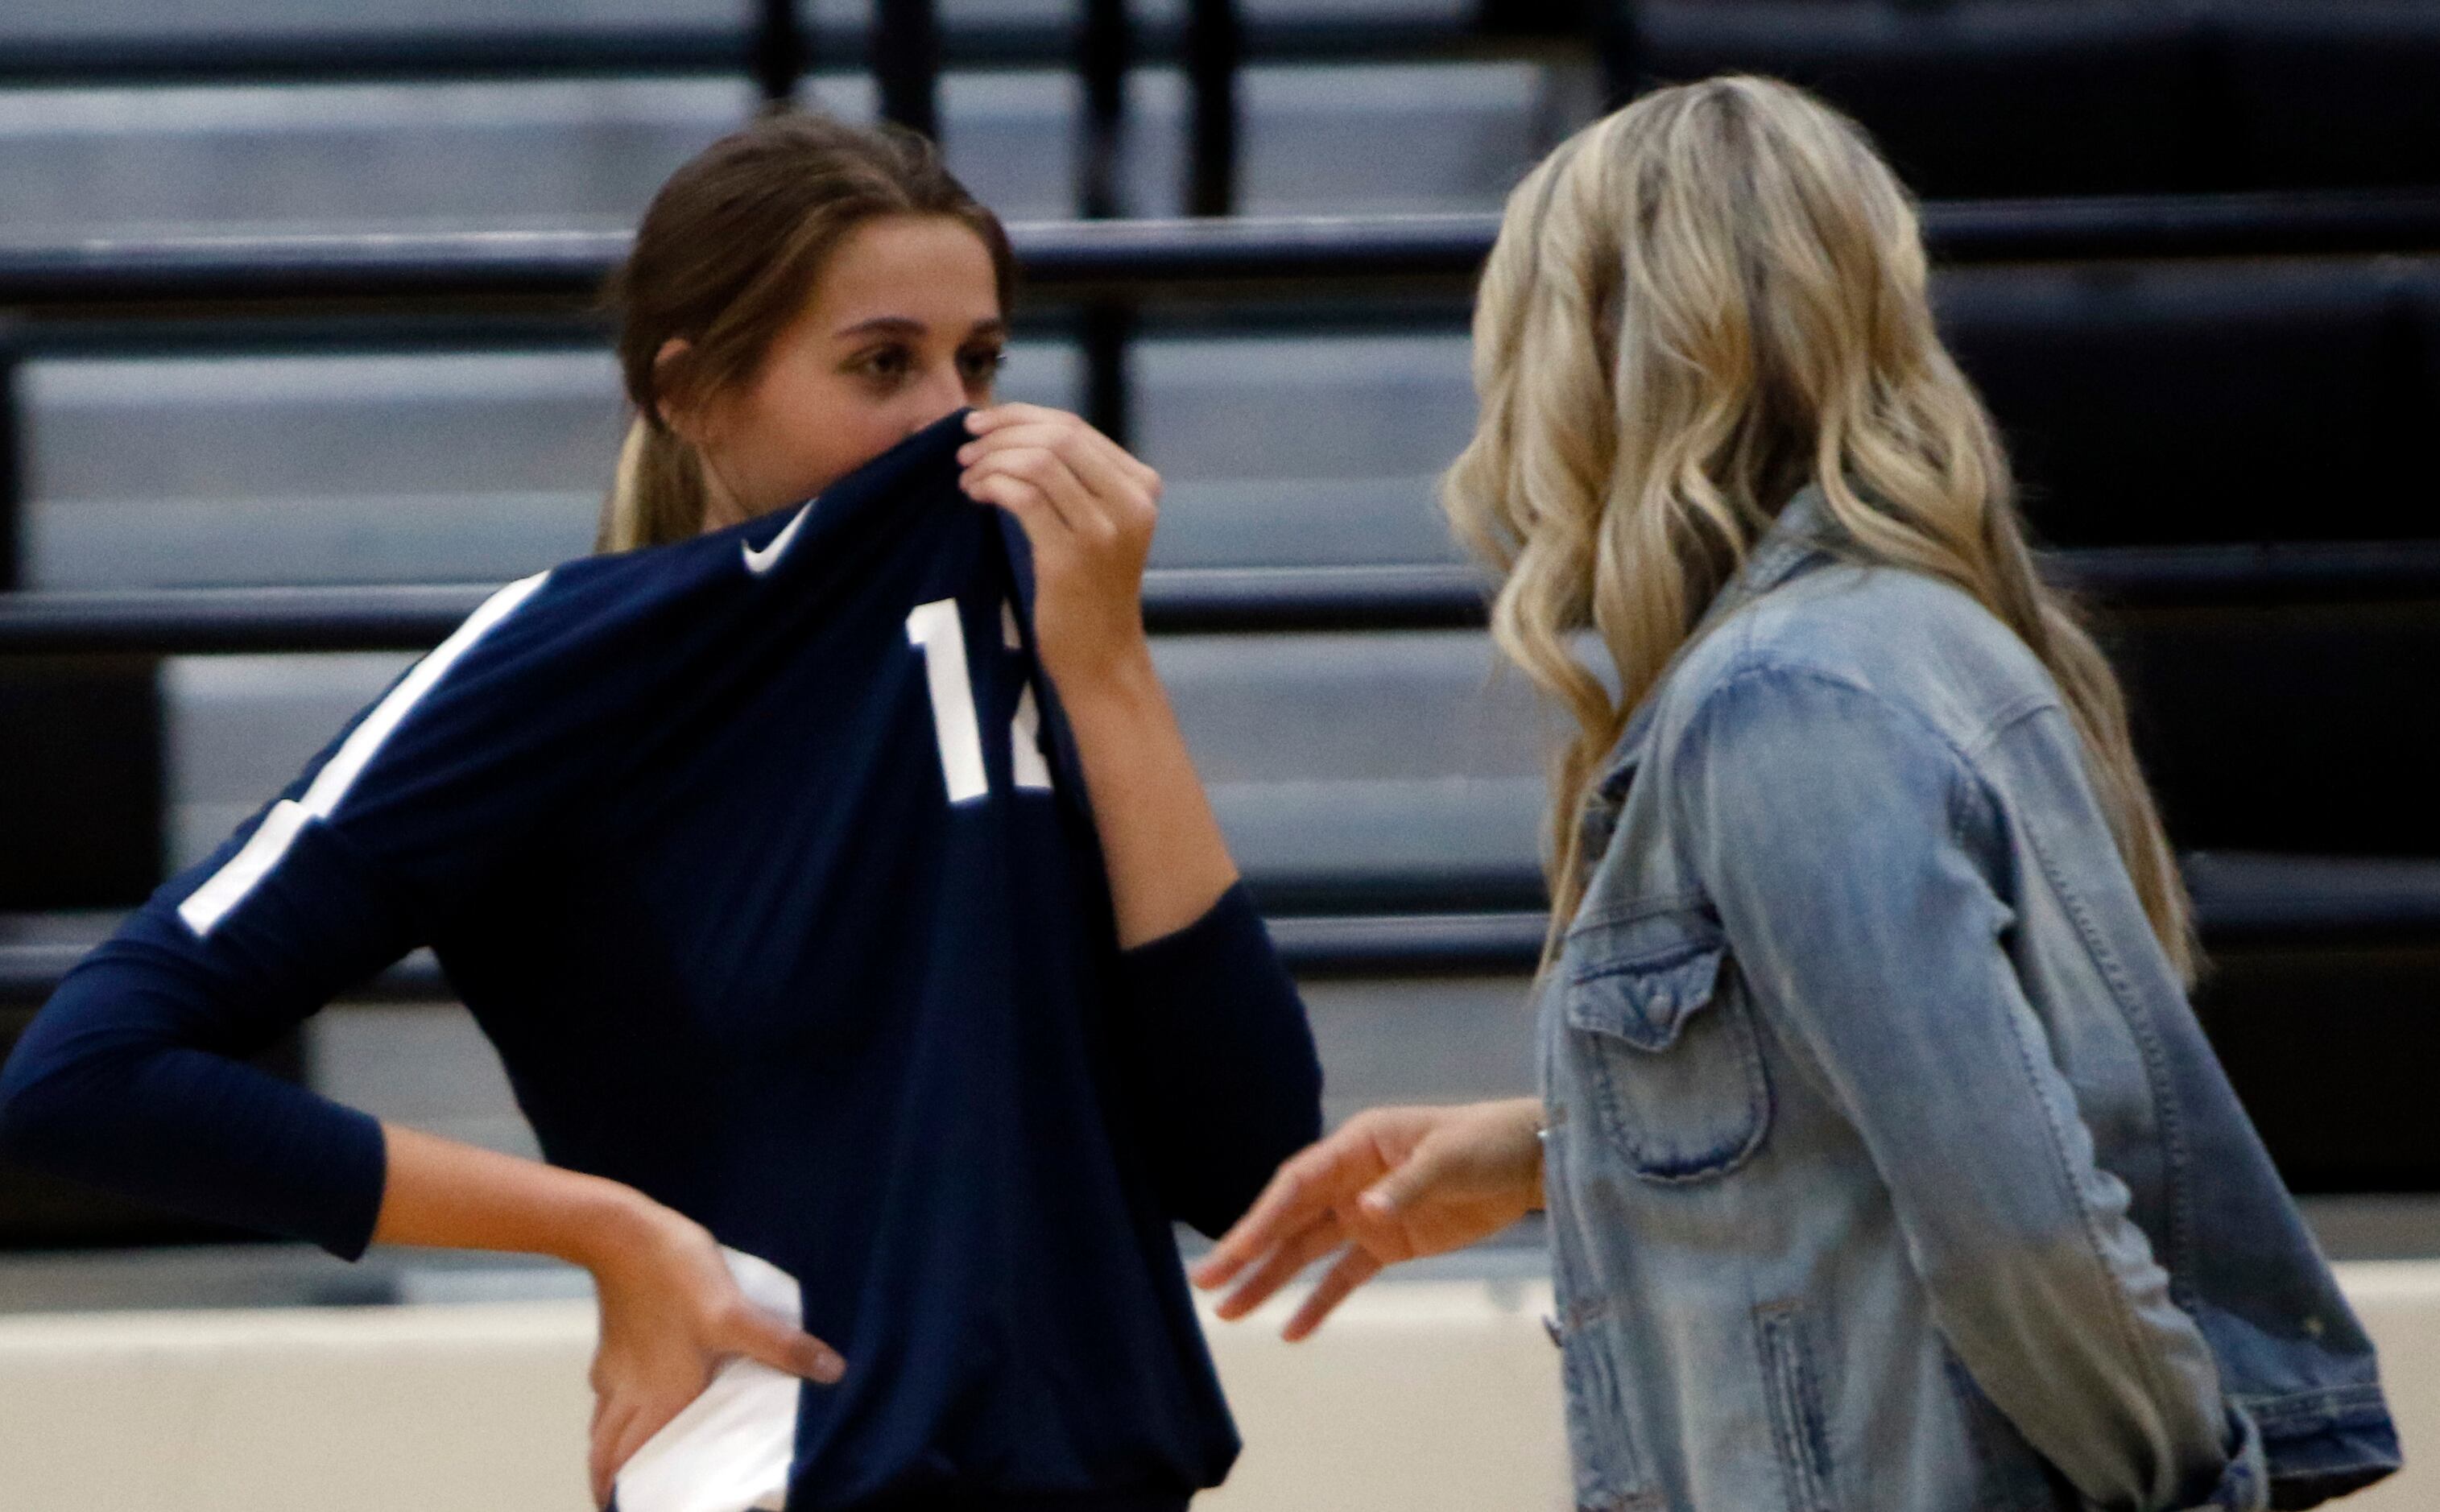 Keller's Melanie McGann (12) uses her game jersey as a make-shift face covering while...